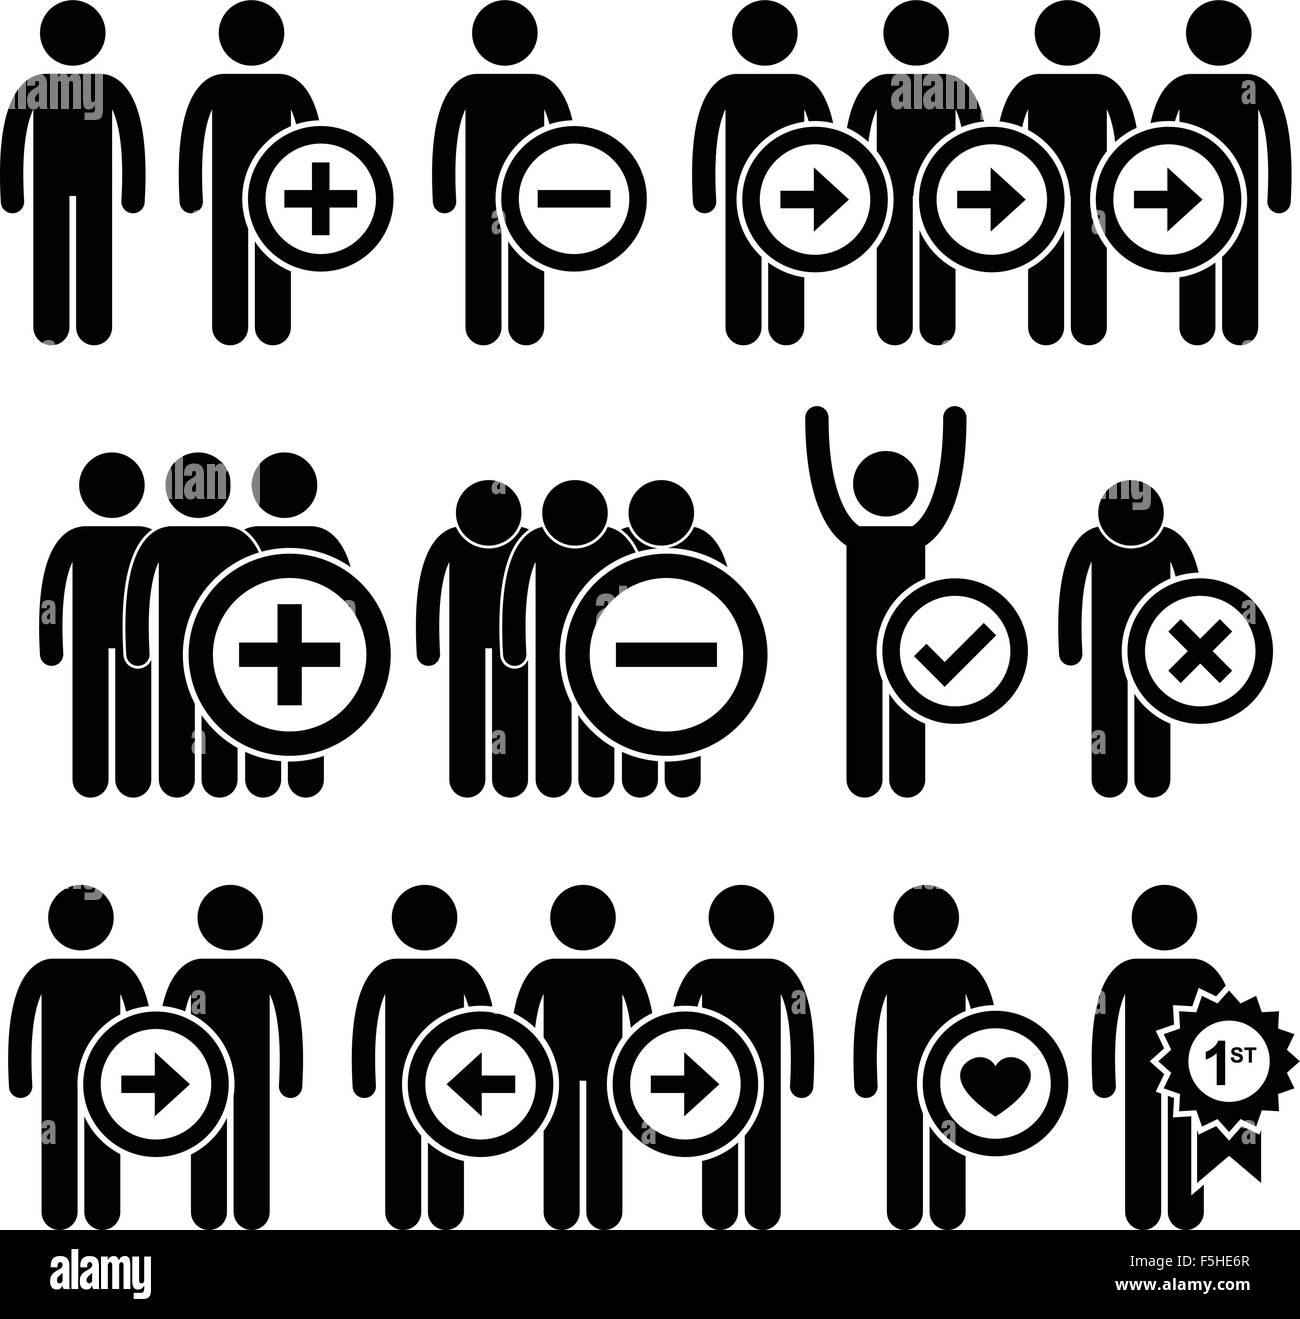 Man Business Human Resource Stick Figure Pictogram Icon Stock Vector